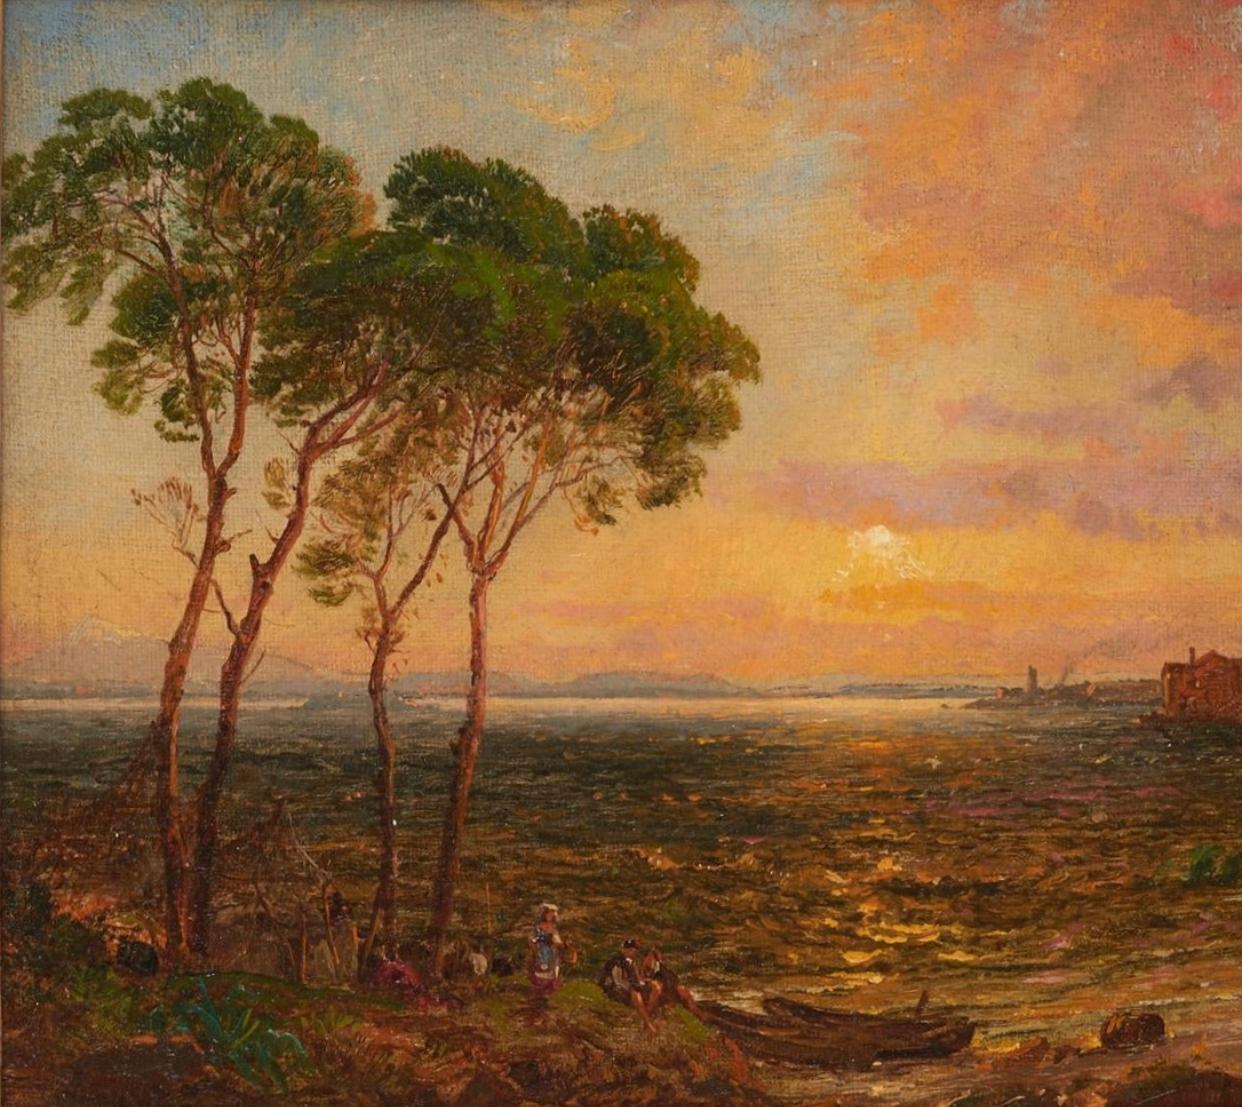 “Sunset over Lake Thrasemine” - Brown Landscape Painting by Jasper Francis Cropsey